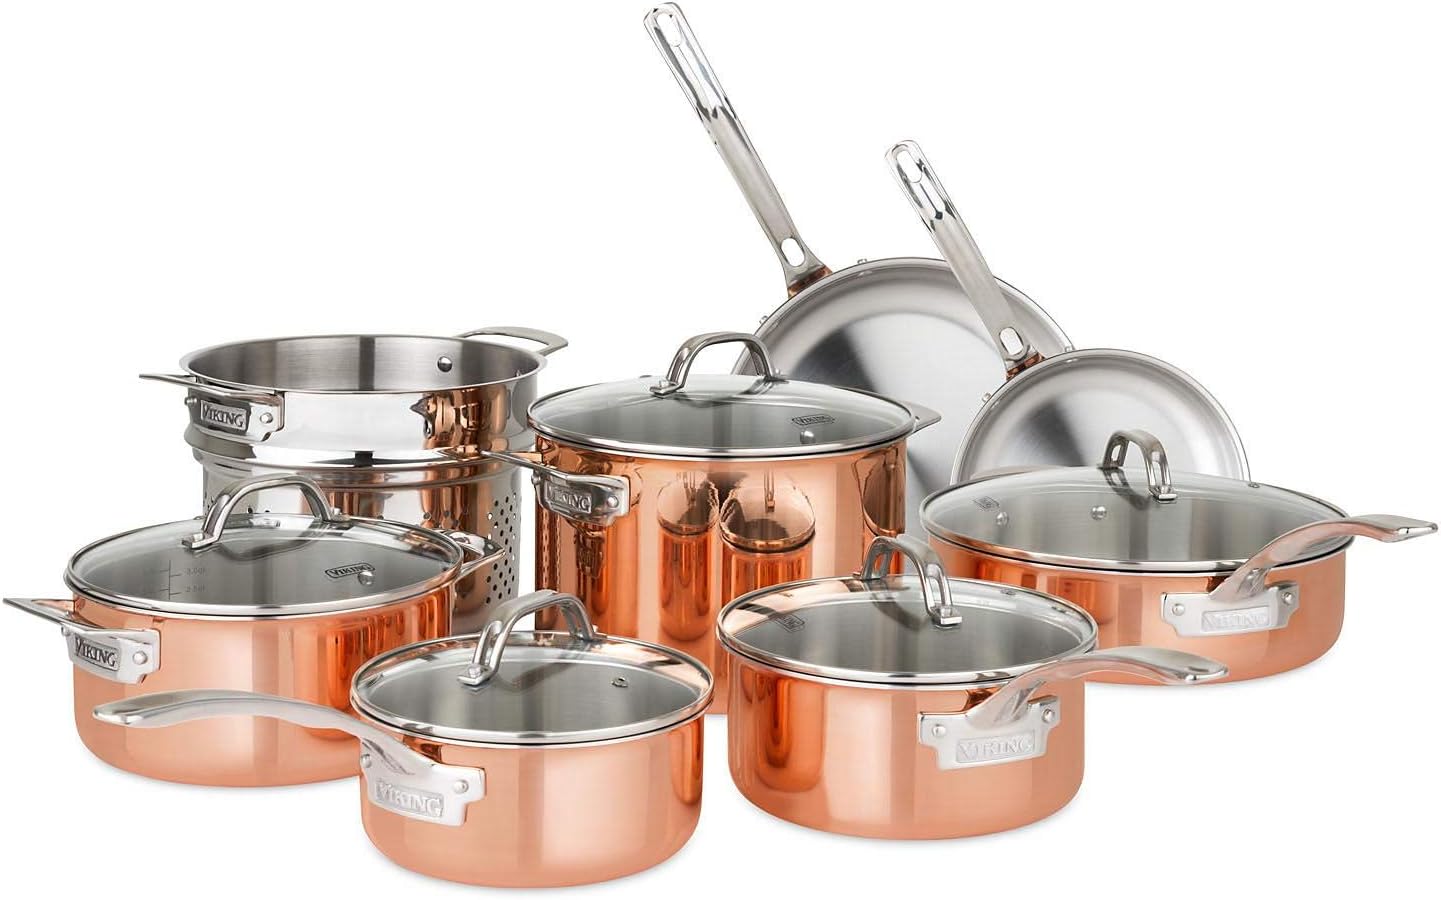 13-Piece Tri-Ply Copper Cookware Set by Viking